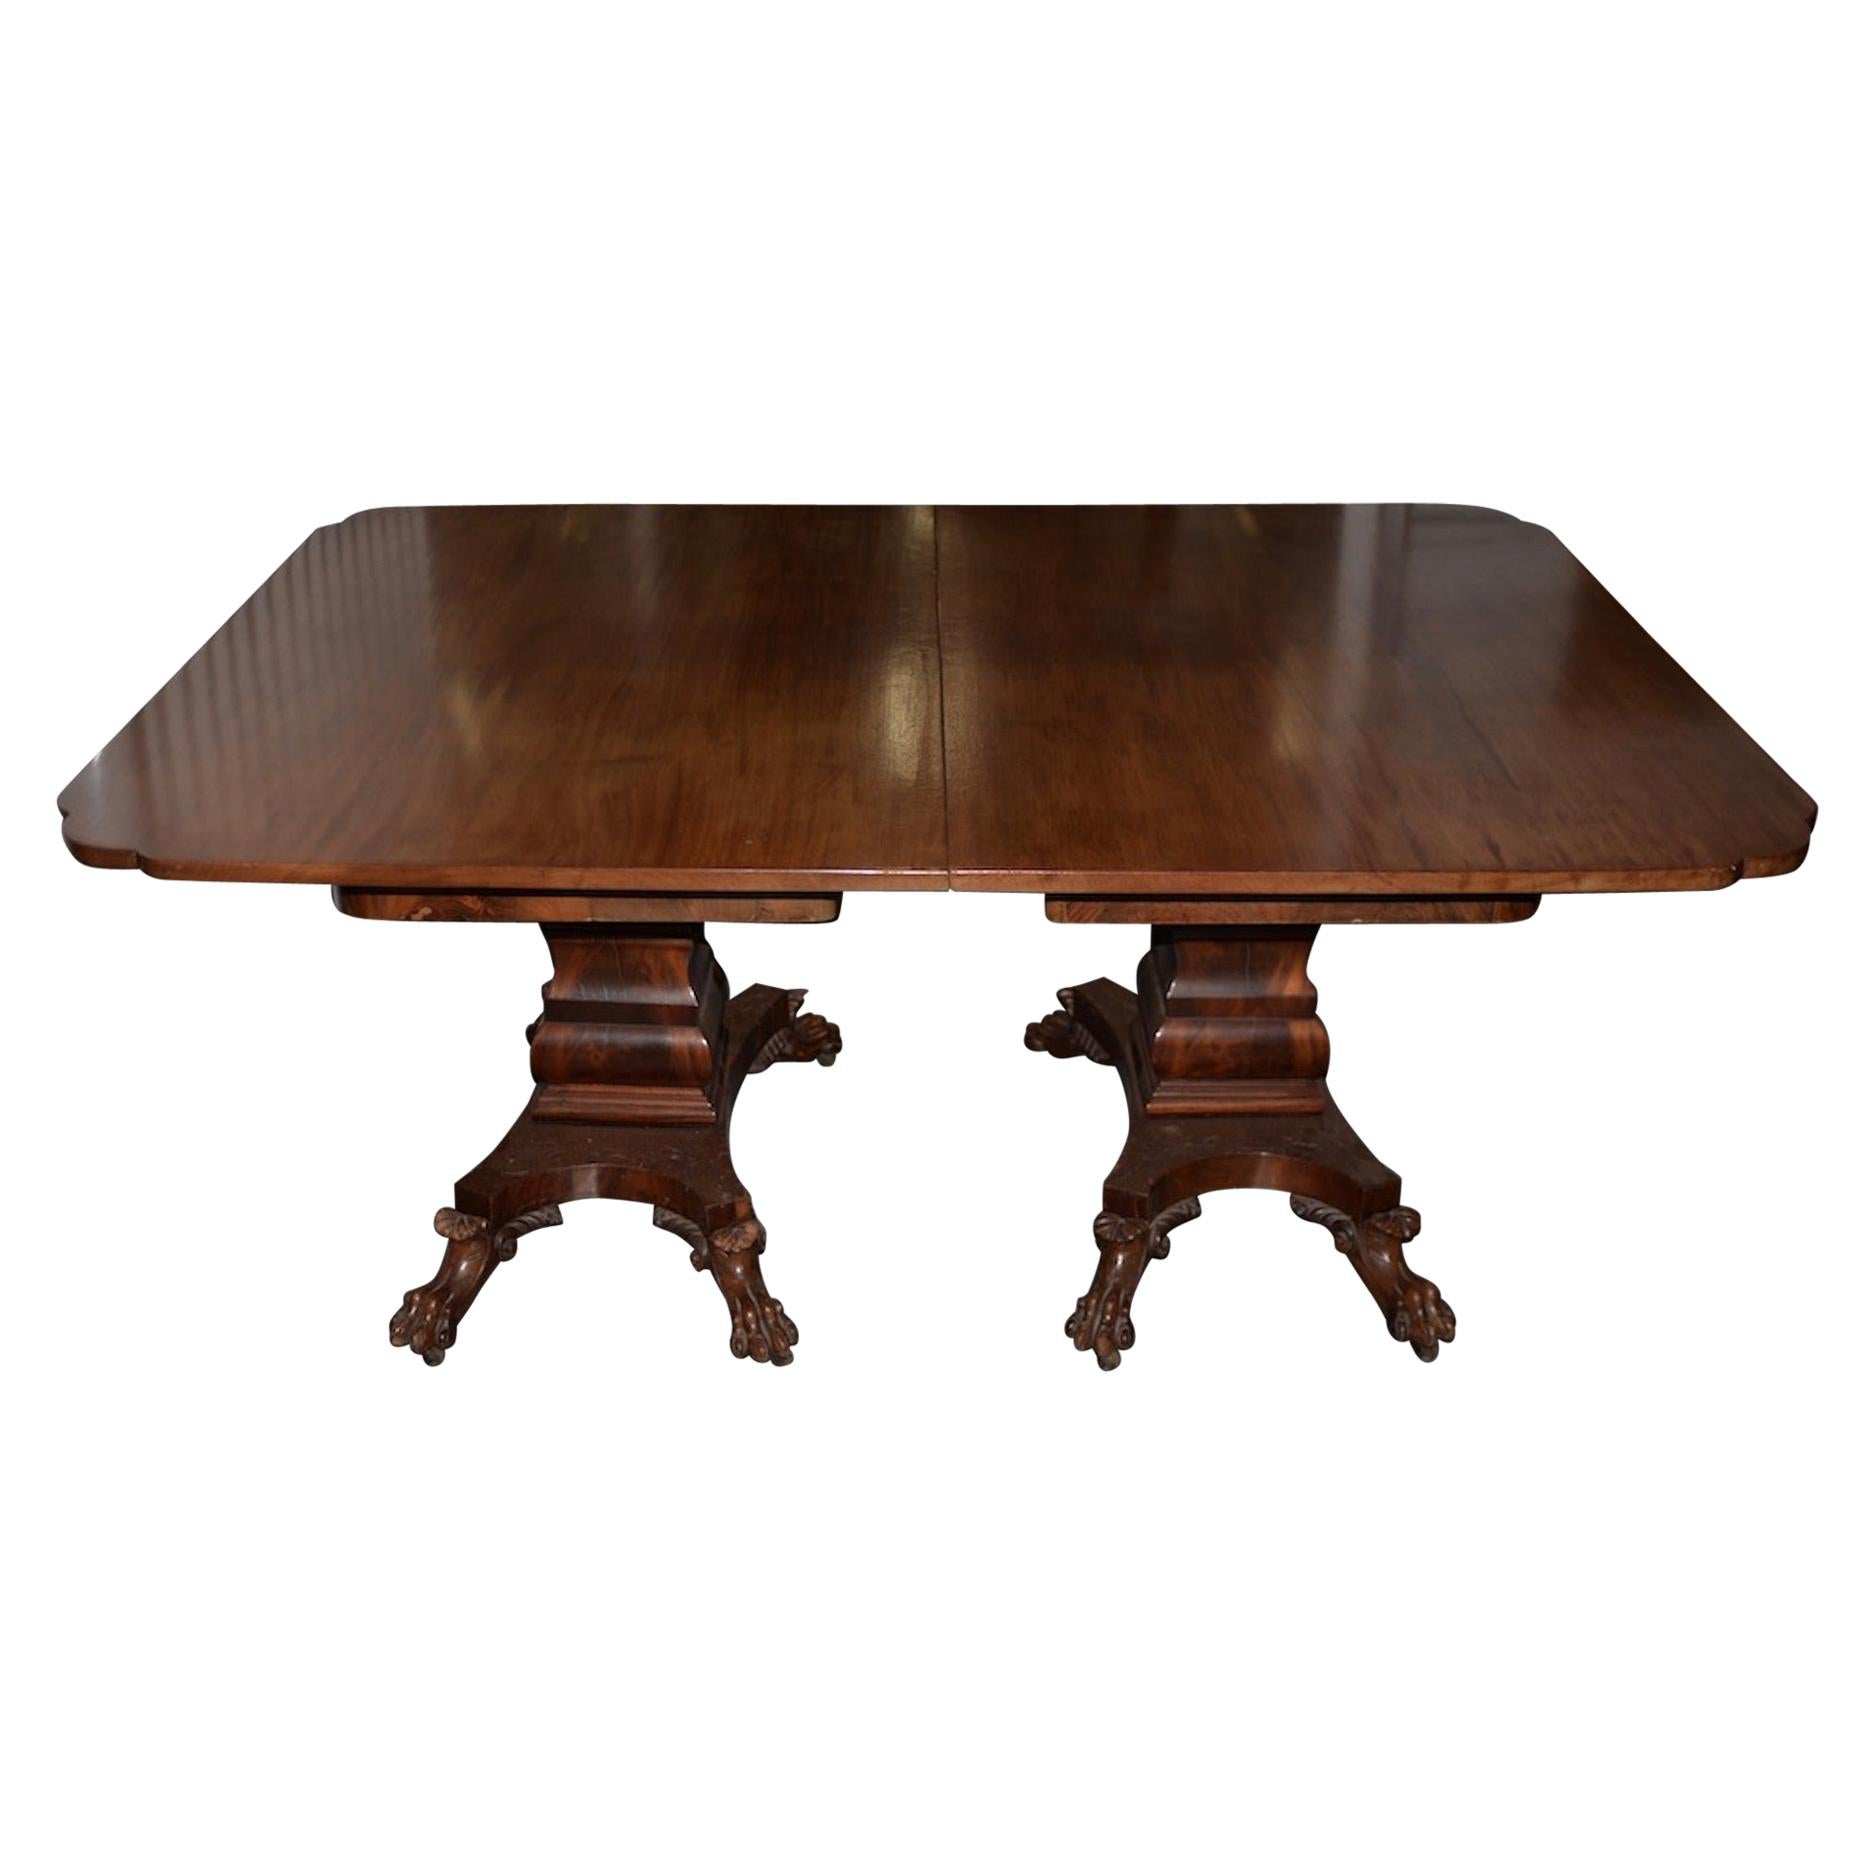 William IV Mahogany Dining Table with Lions Paw Feet, 19th Century